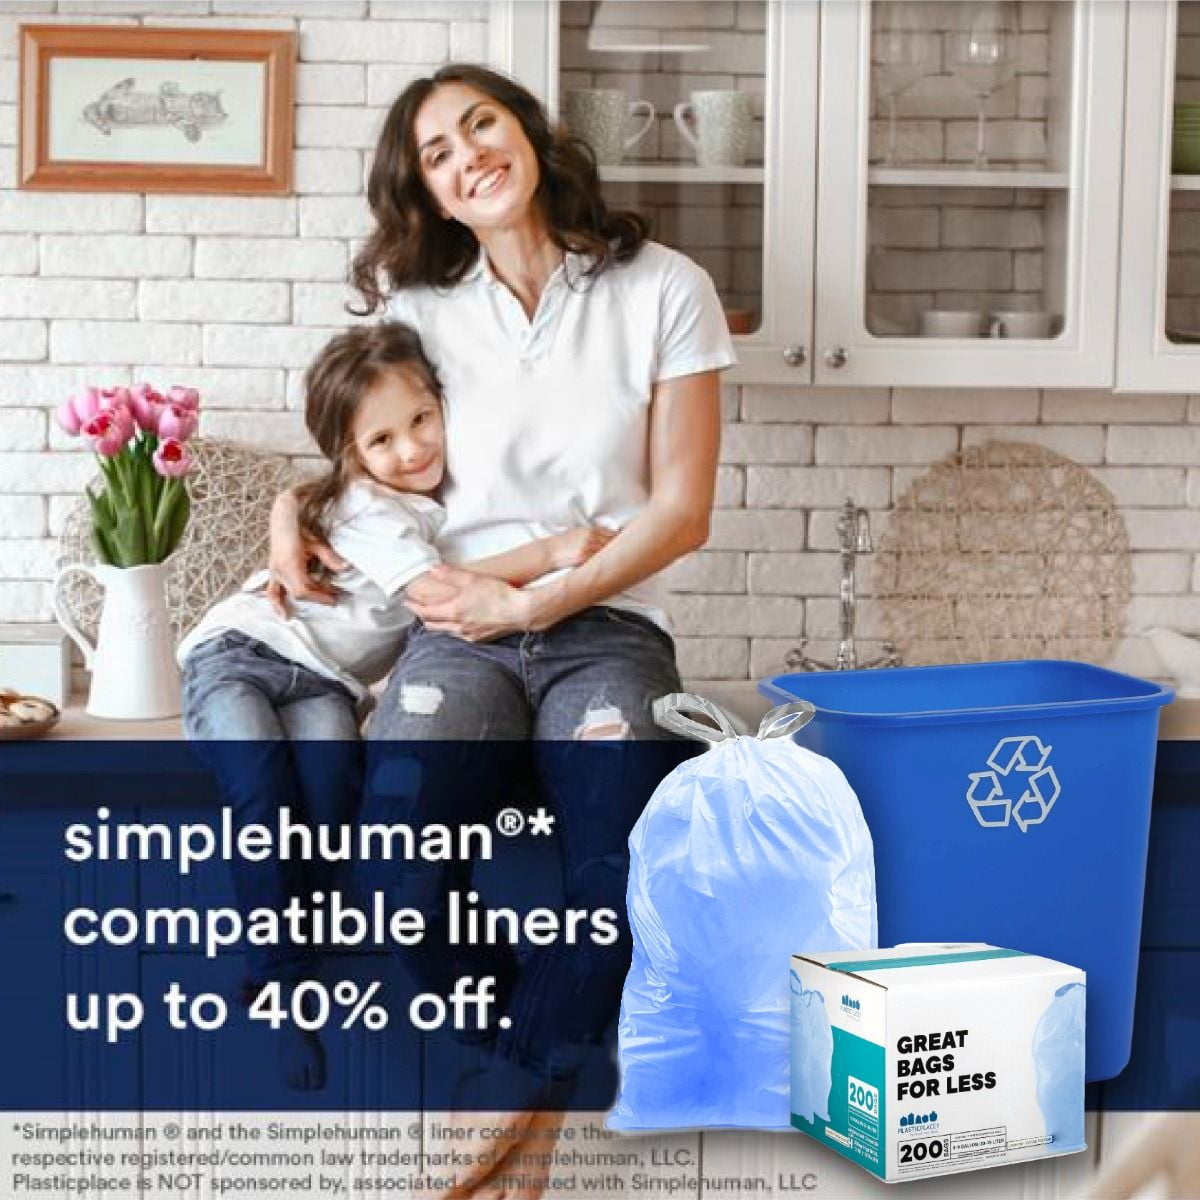 DisplayForever 2 Packs(100 Count total) Code H 8-9 Gallon Heavy Duty Drawstring Trash Bags Compatible with simplehuman Code H | 1.2 Mil | White